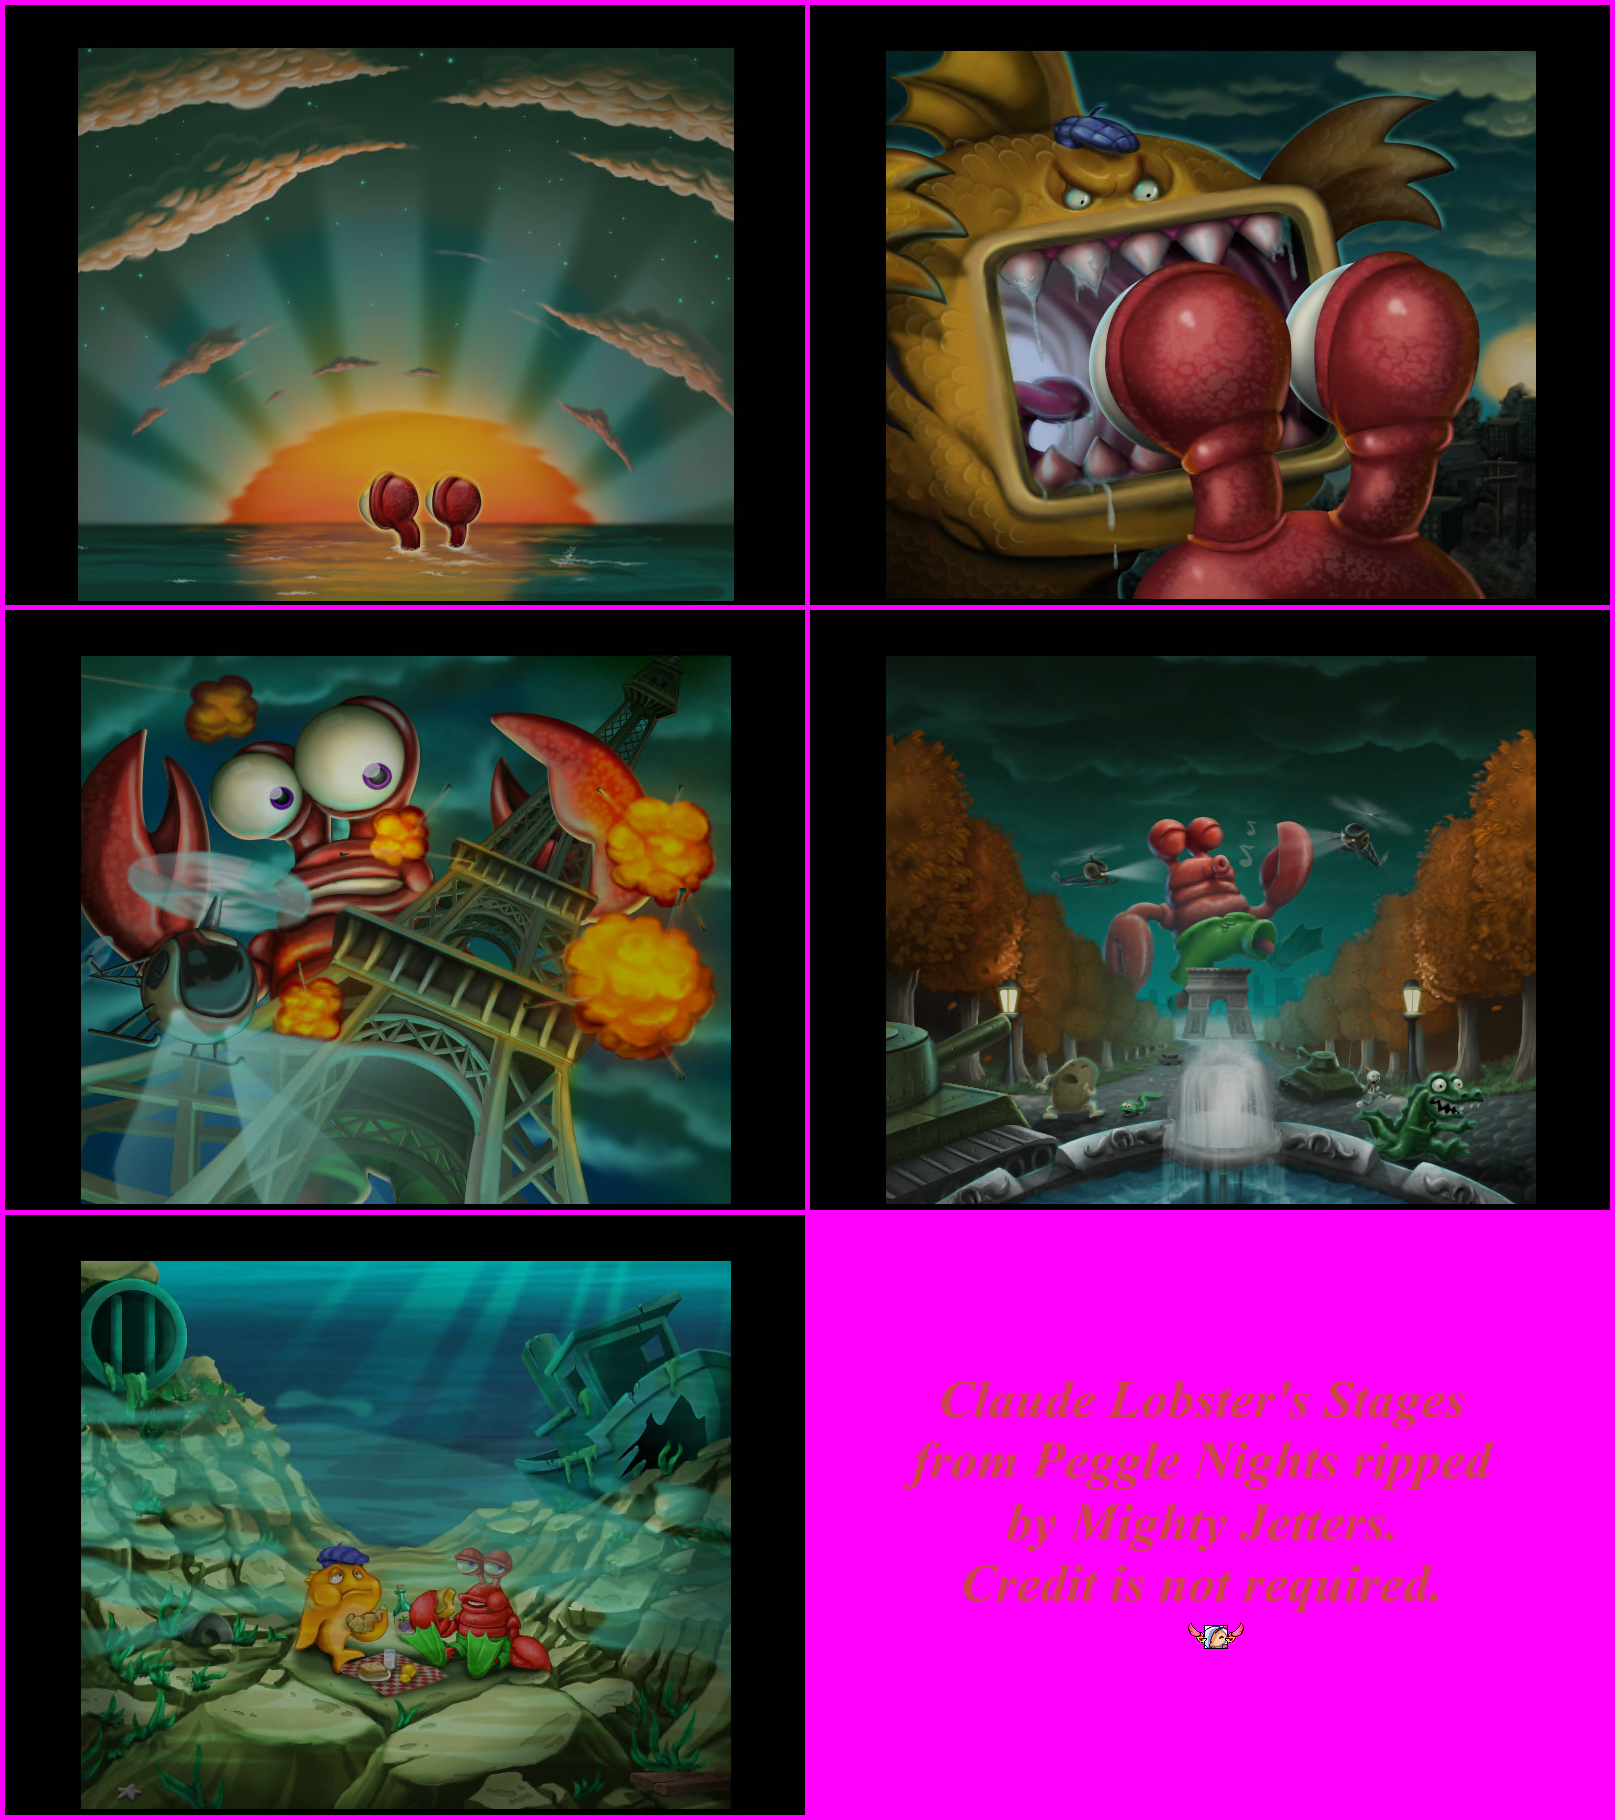 Claude Lobster's Stages